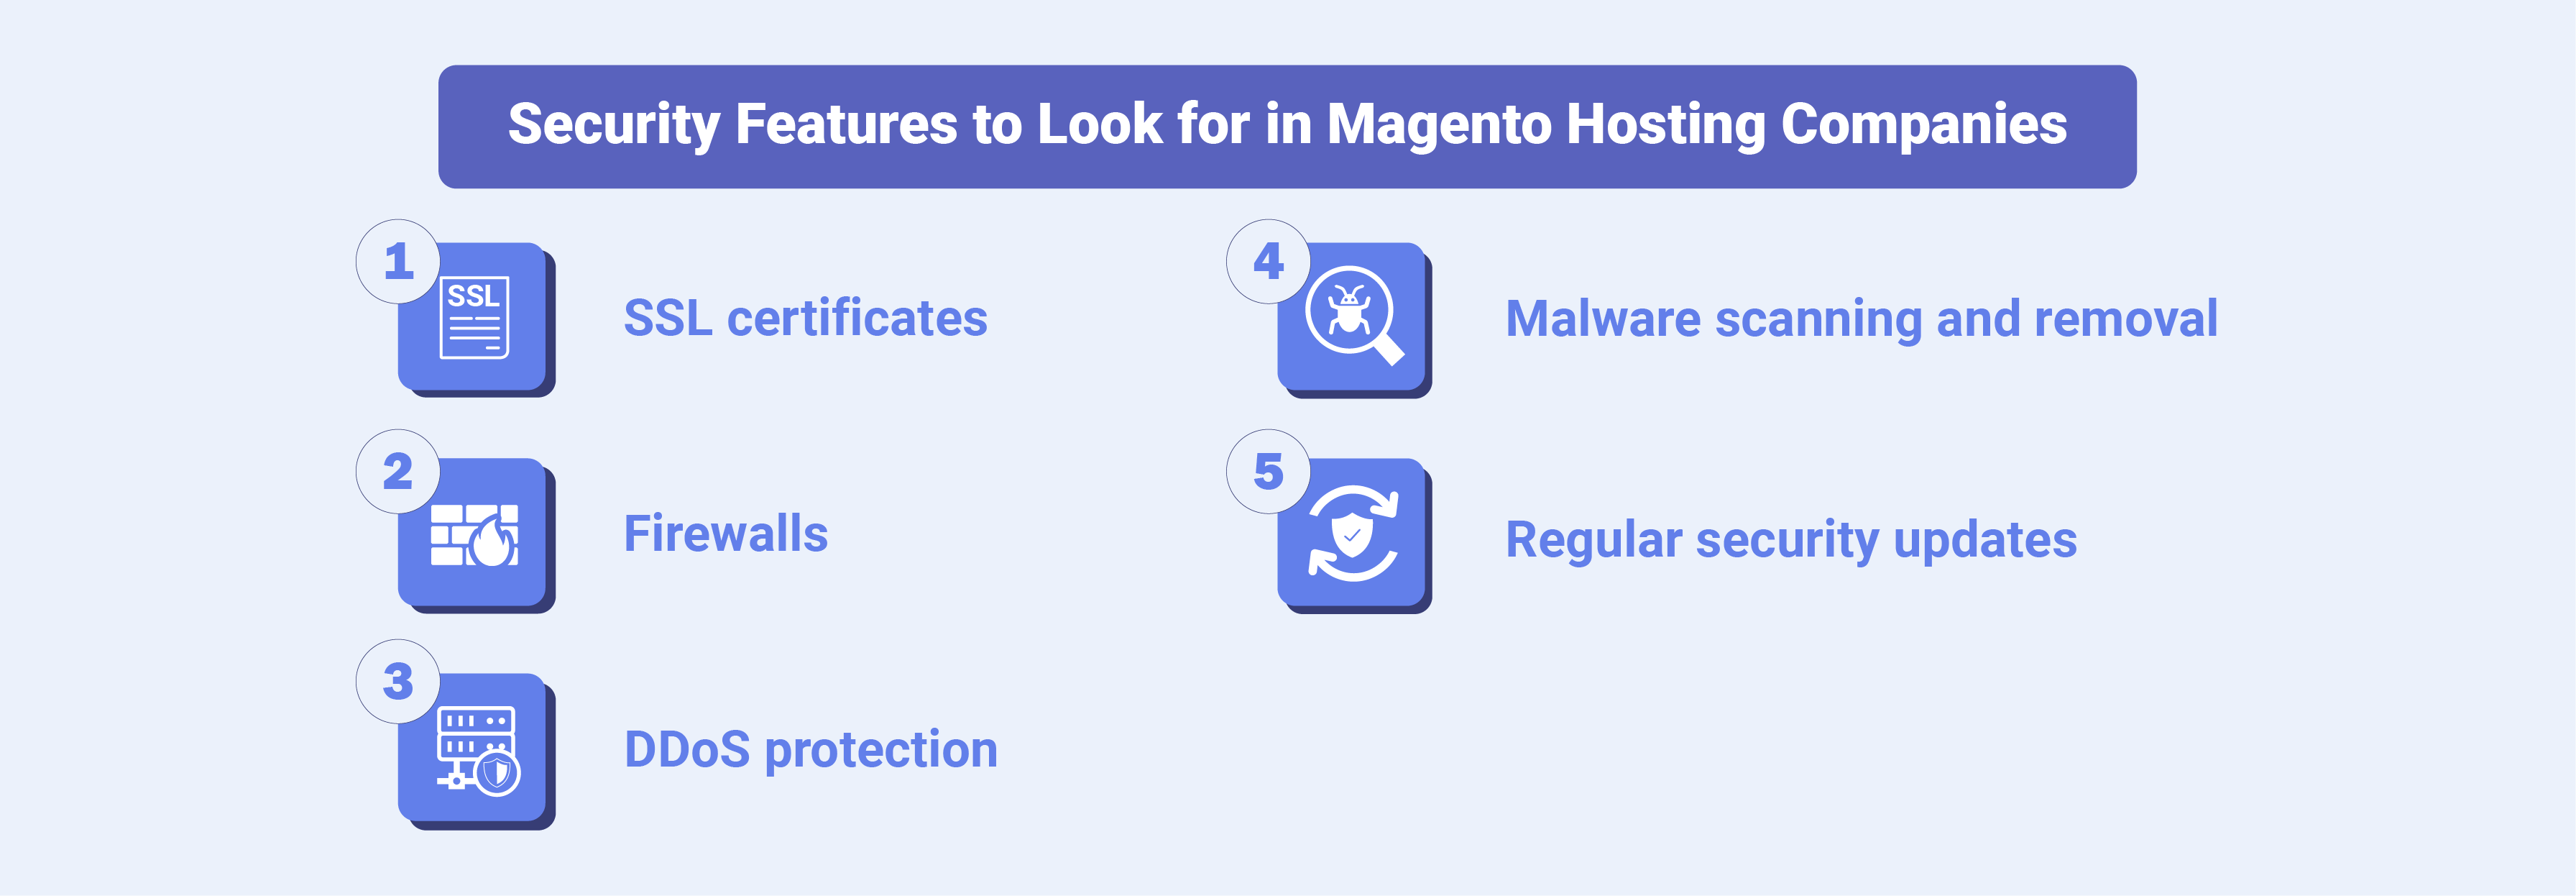 Essential security features in Magento hosting services